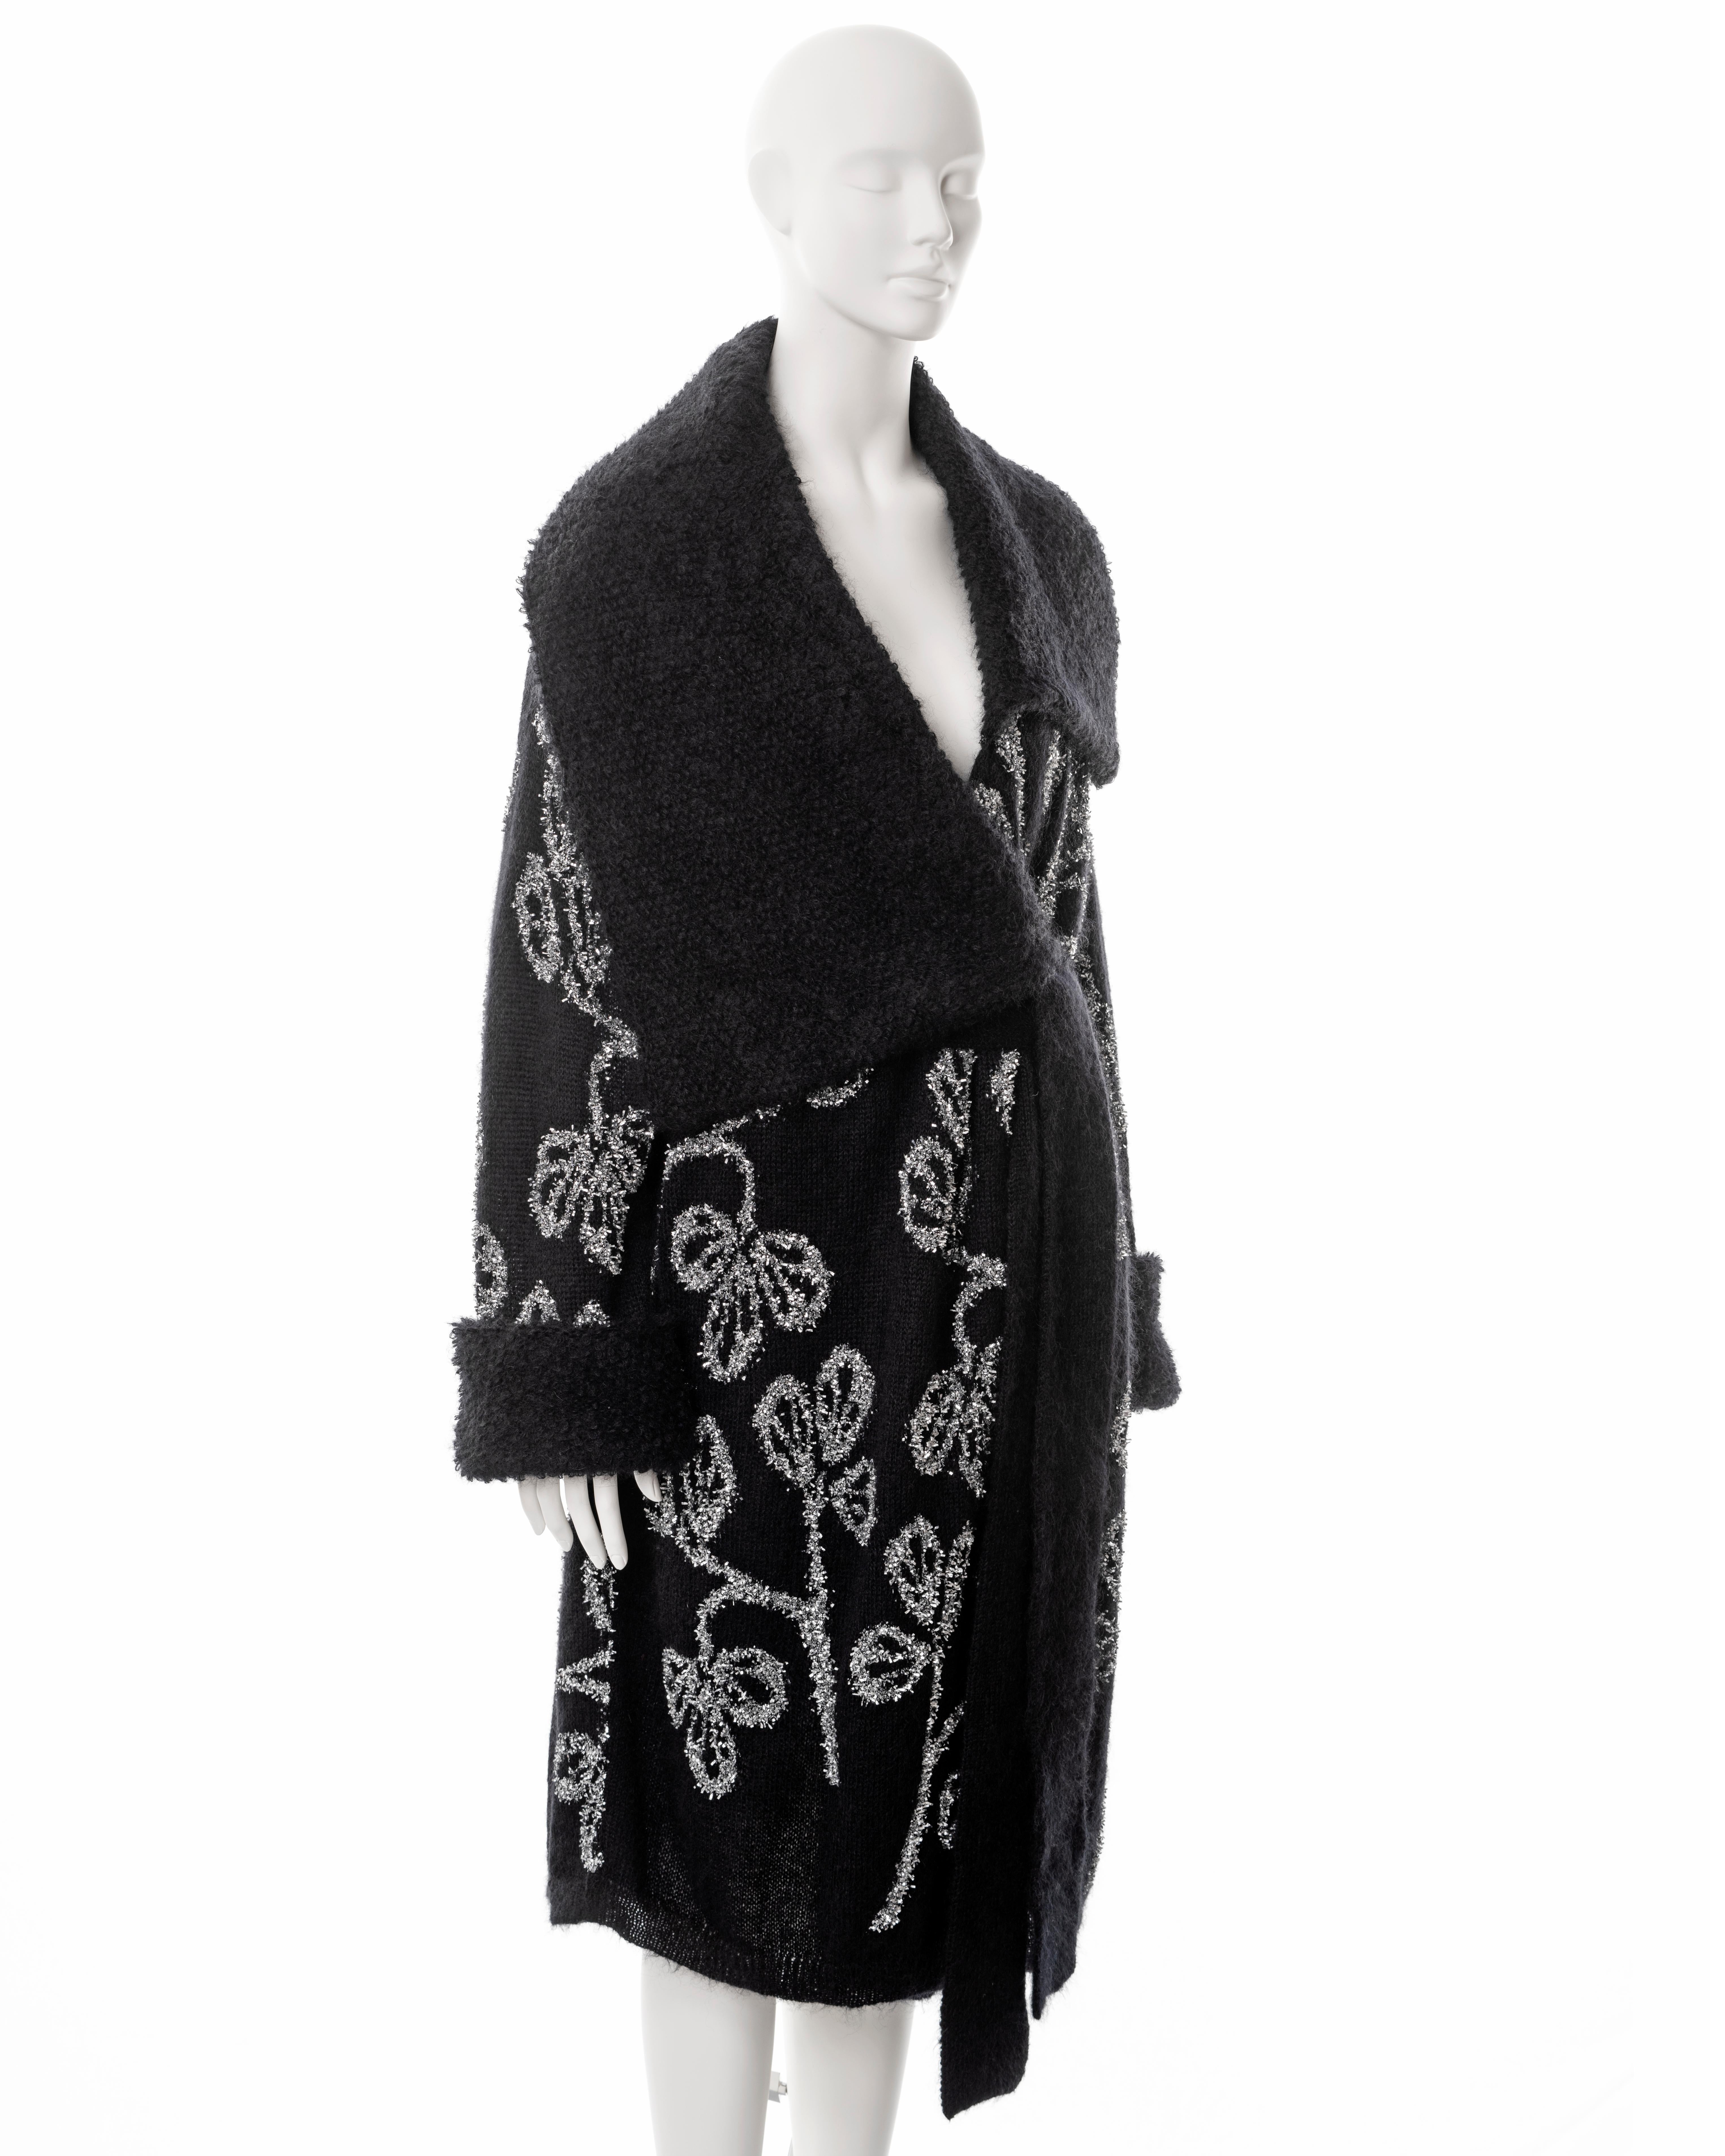 Women's John Galliano black knitted wool cardigan with silver tinsel embroidery, ss 2003